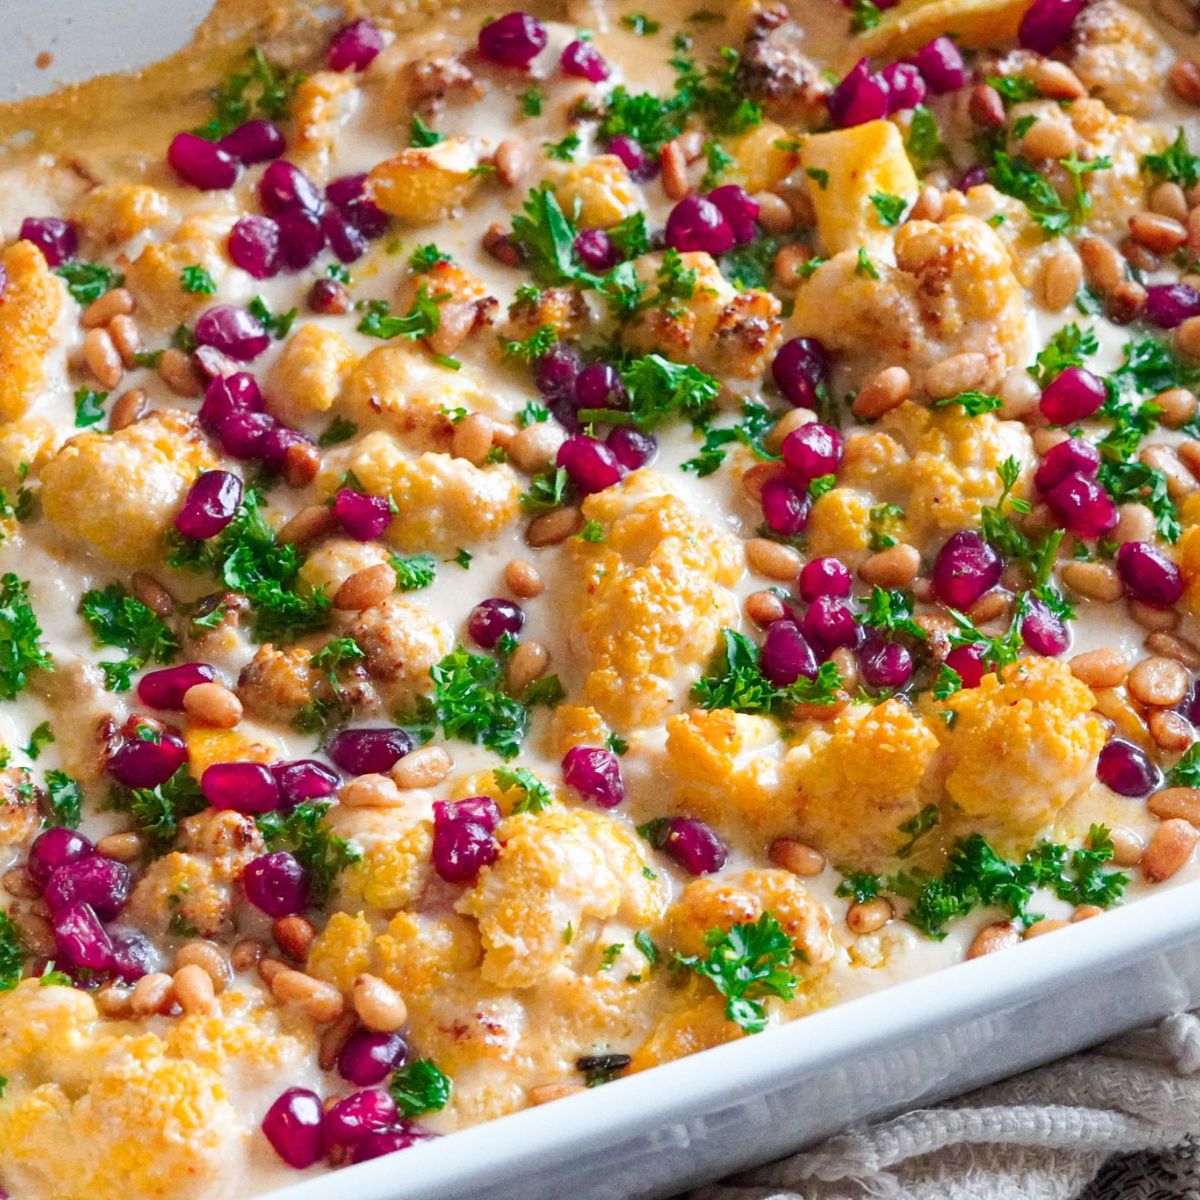 A freshly baked tray of cauliflower garnished with pomegranate seeds, pine nuts and chopped parsley